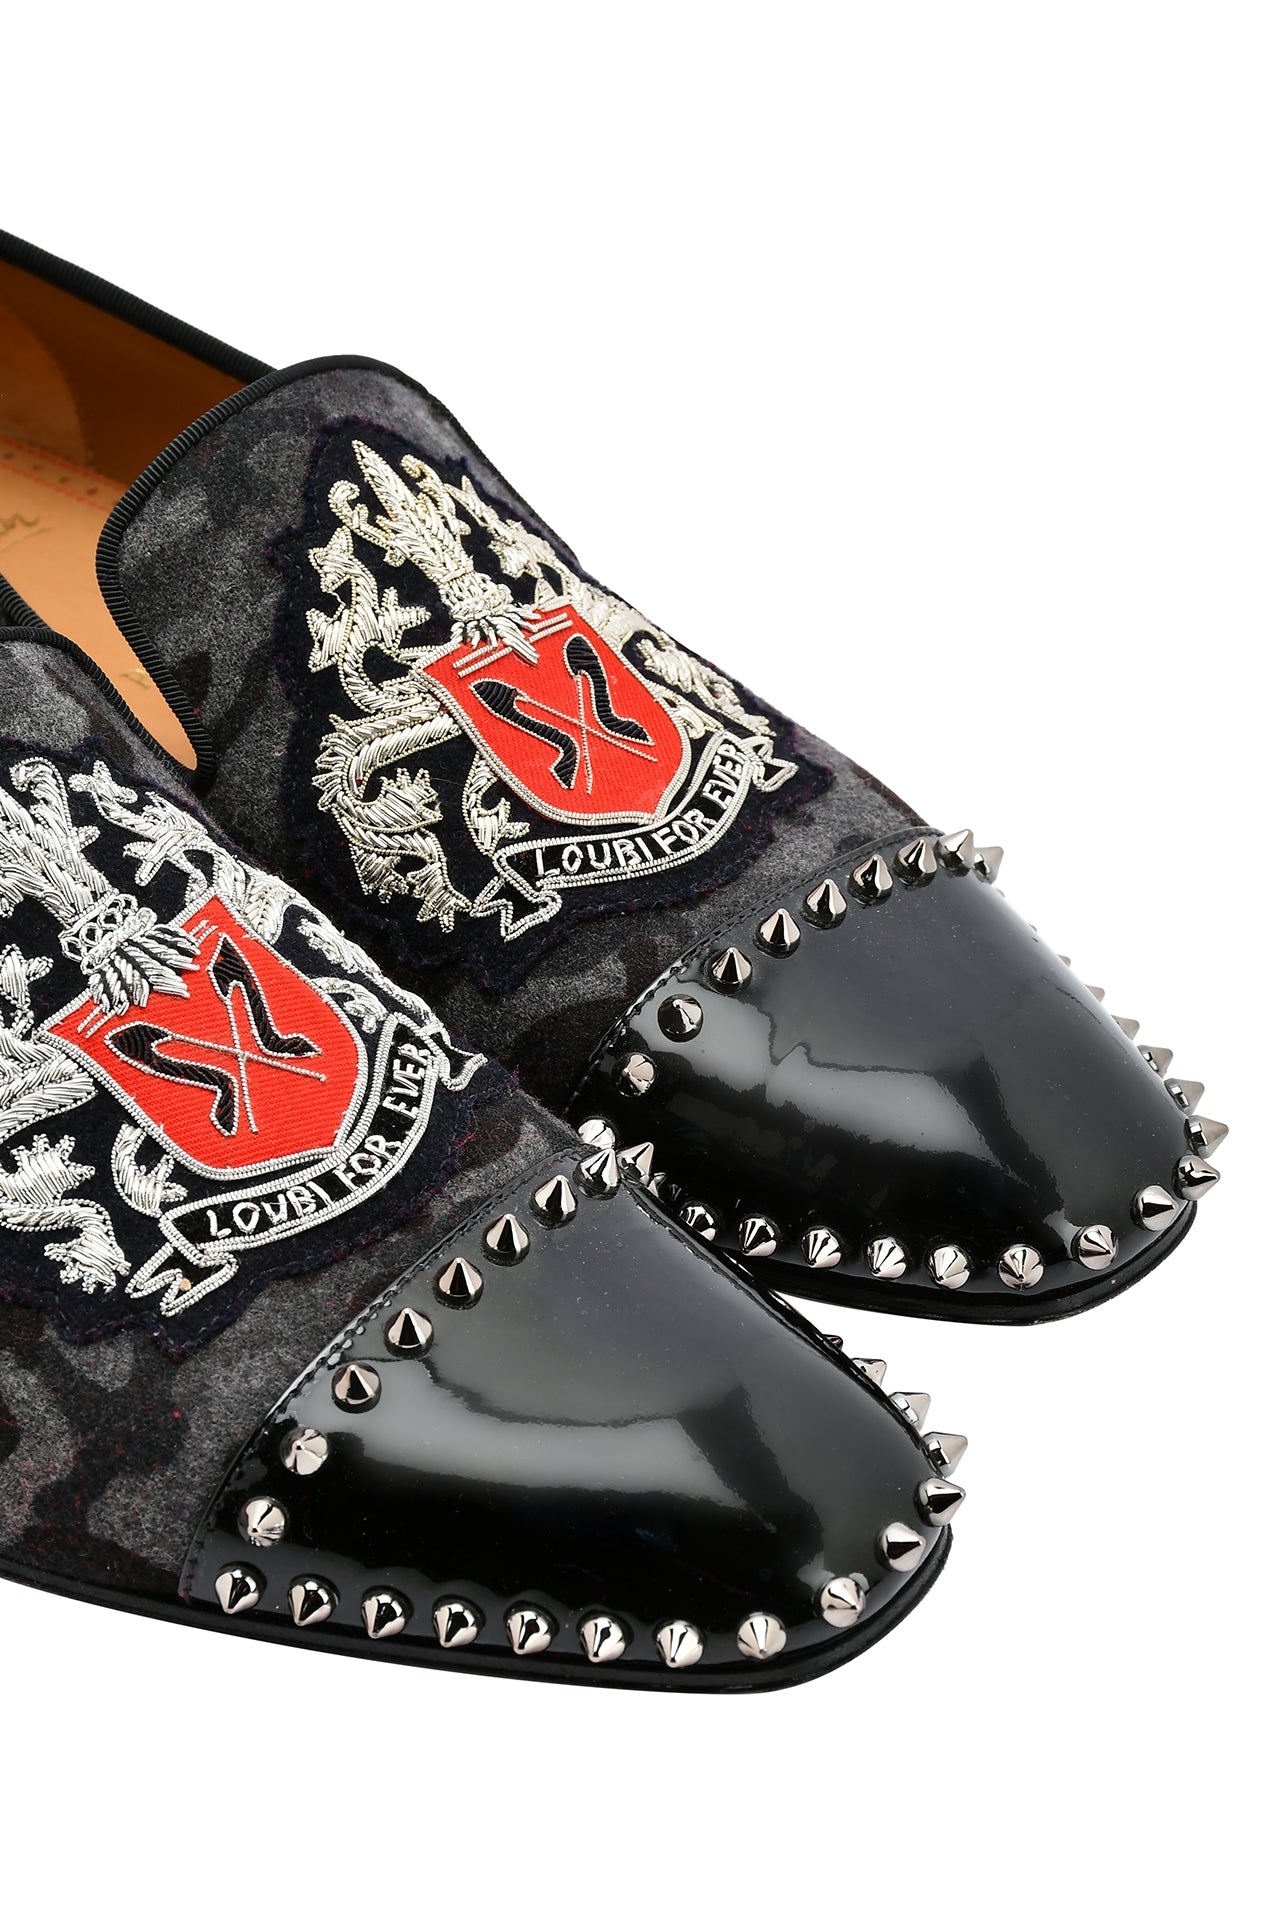 Christian Louboutin Black Suede and Patent Leather Loubi Forever Spike Loafers EU 41